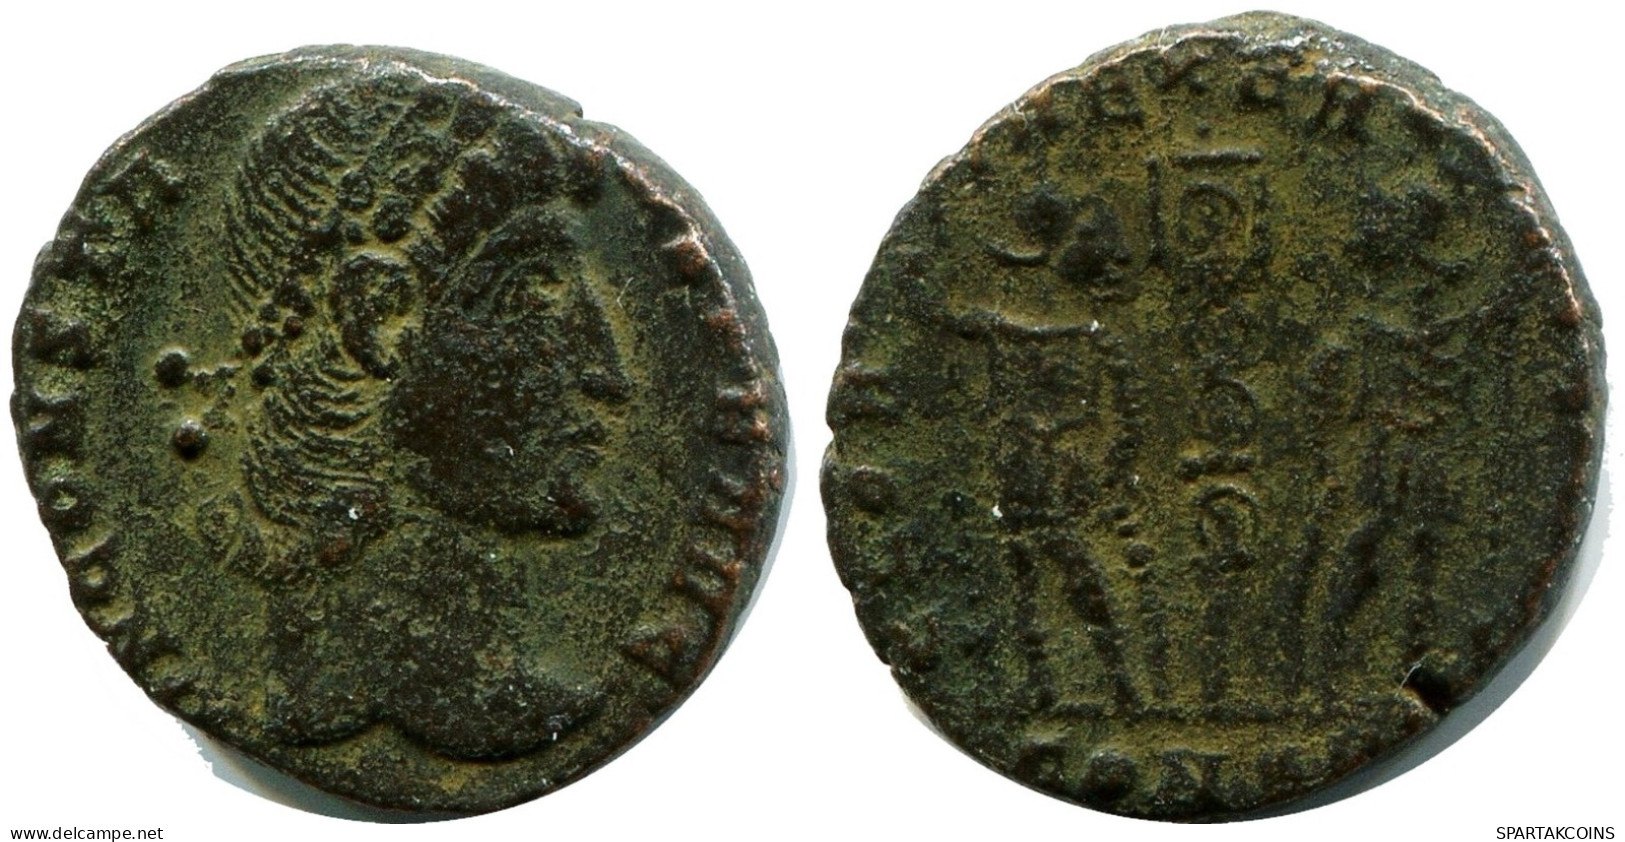 CONSTANS MINTED IN CONSTANTINOPLE FROM THE ROYAL ONTARIO MUSEUM #ANC11921.14.E.A - Der Christlischen Kaiser (307 / 363)